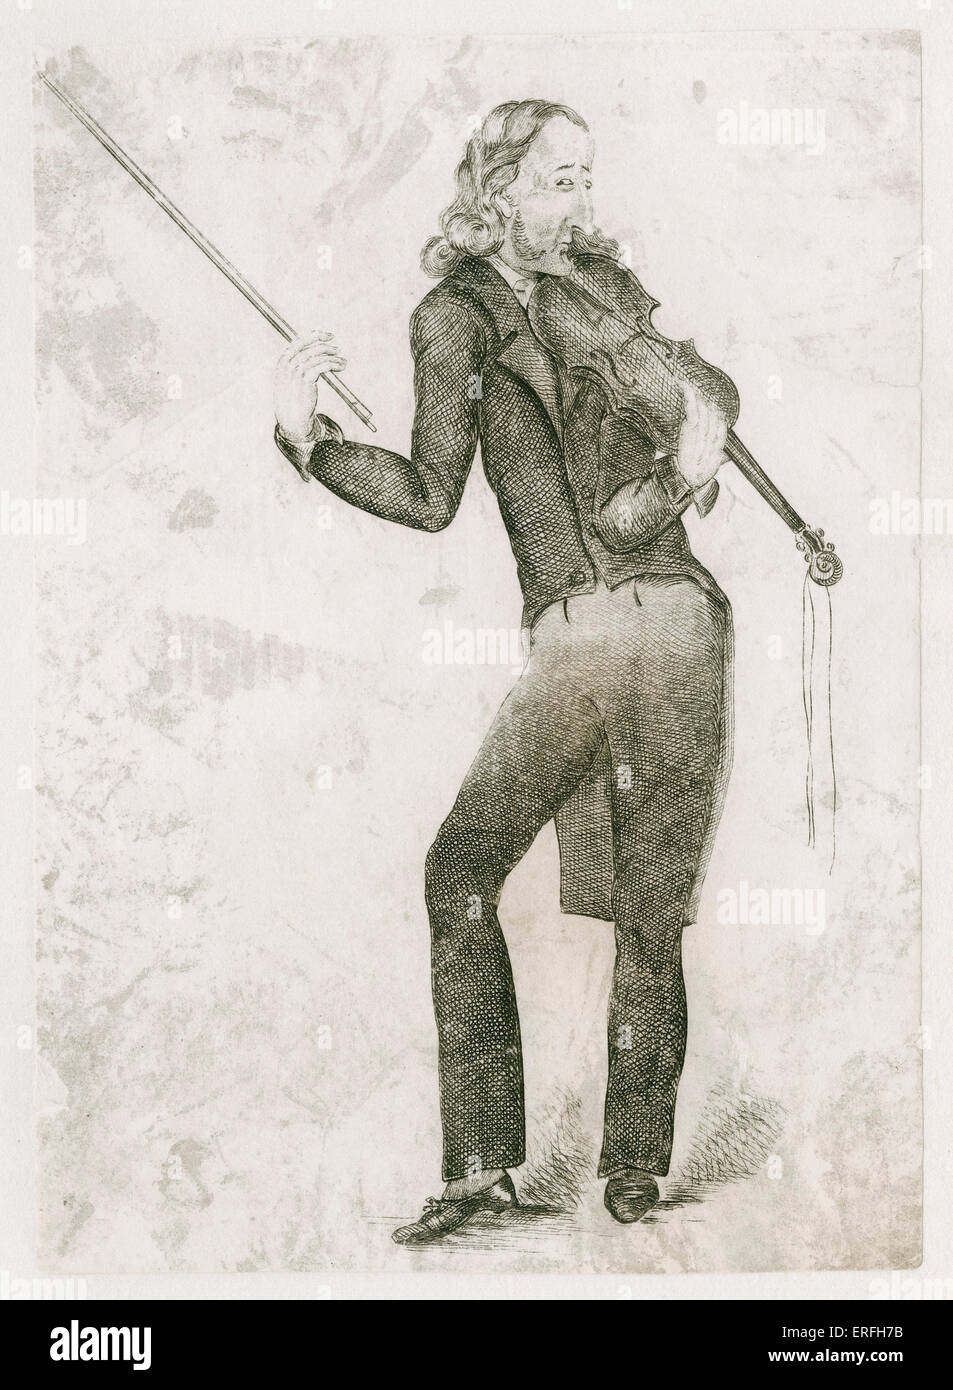 Niccolo Paganini - caricature portrait of the Italian violinist and composer playing the violin on a single string. Engraving, Stock Photo